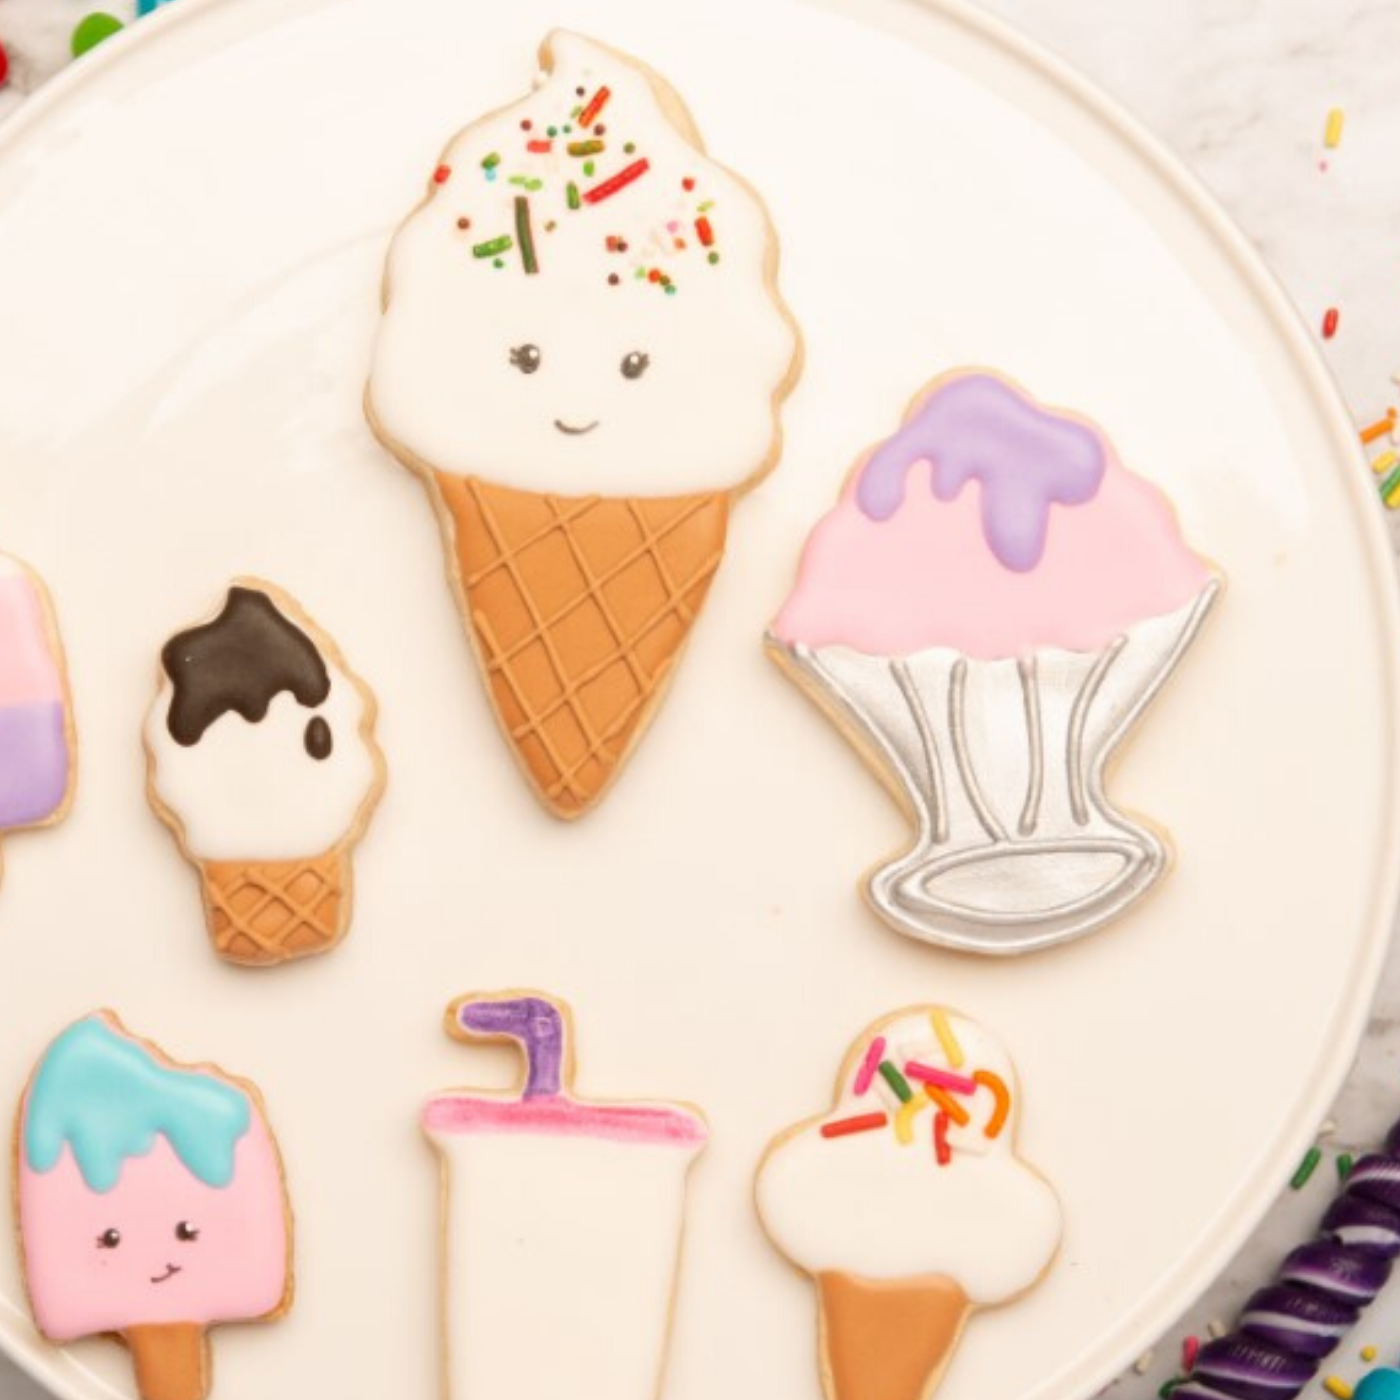 Ice cream cone and ice cream sundae shaped cookies decorated with colored frosting made using the Ice Cream Parlor Set of 2 Cookie Cutters